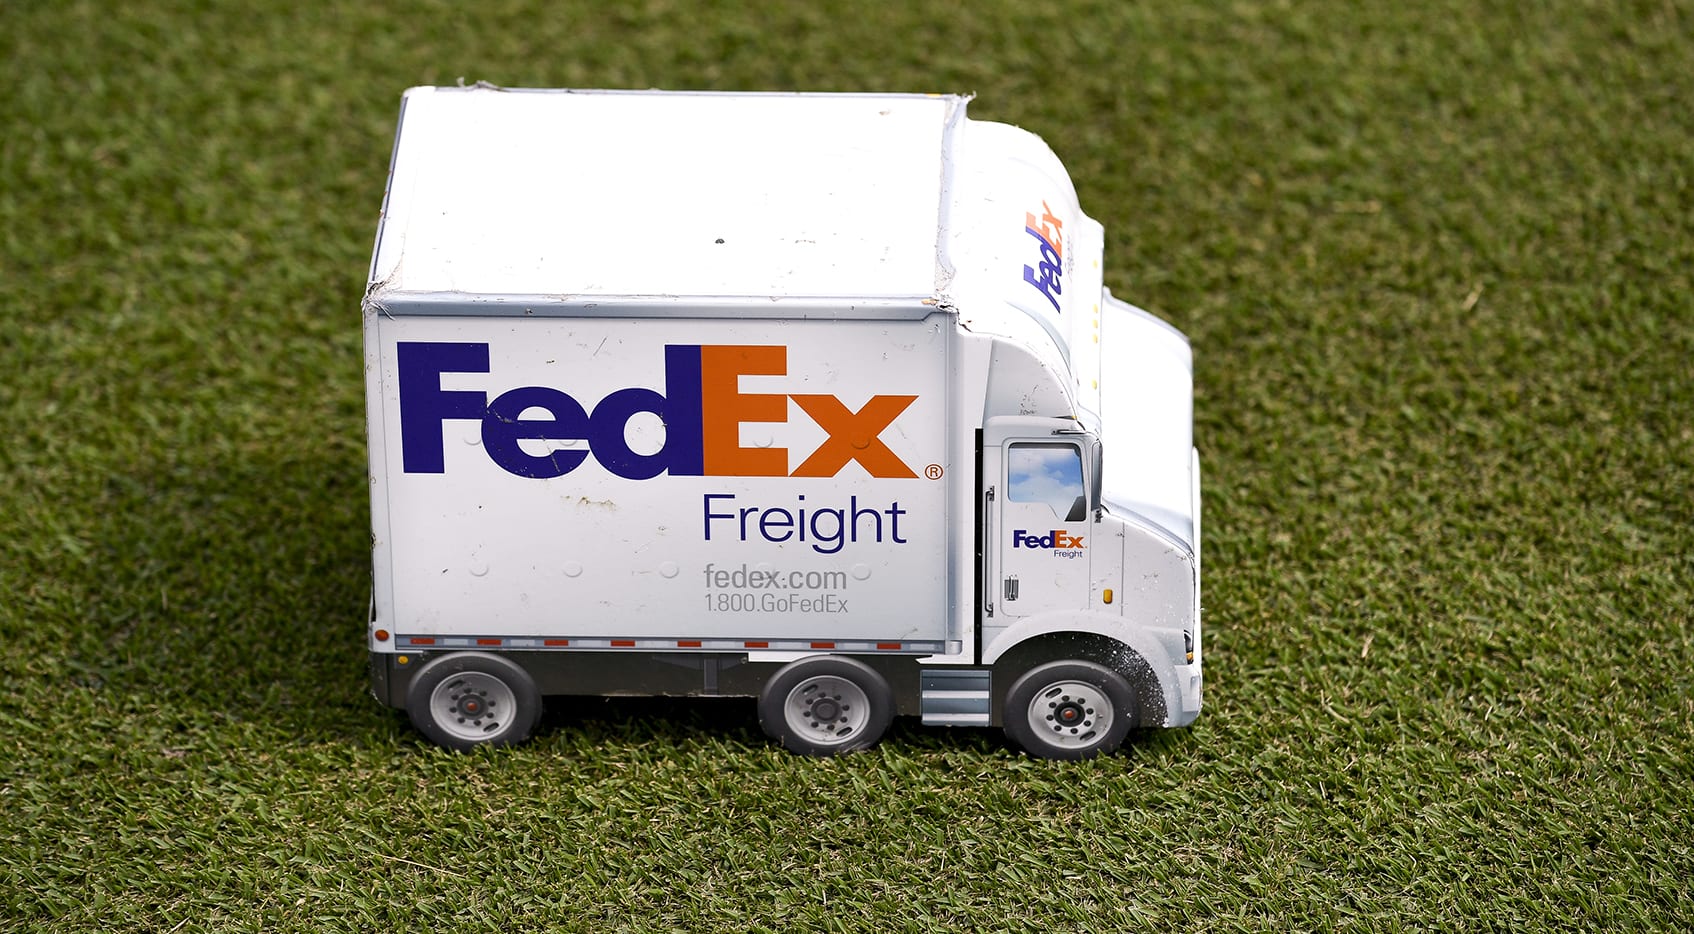 How to watch the WGC-FedEx St